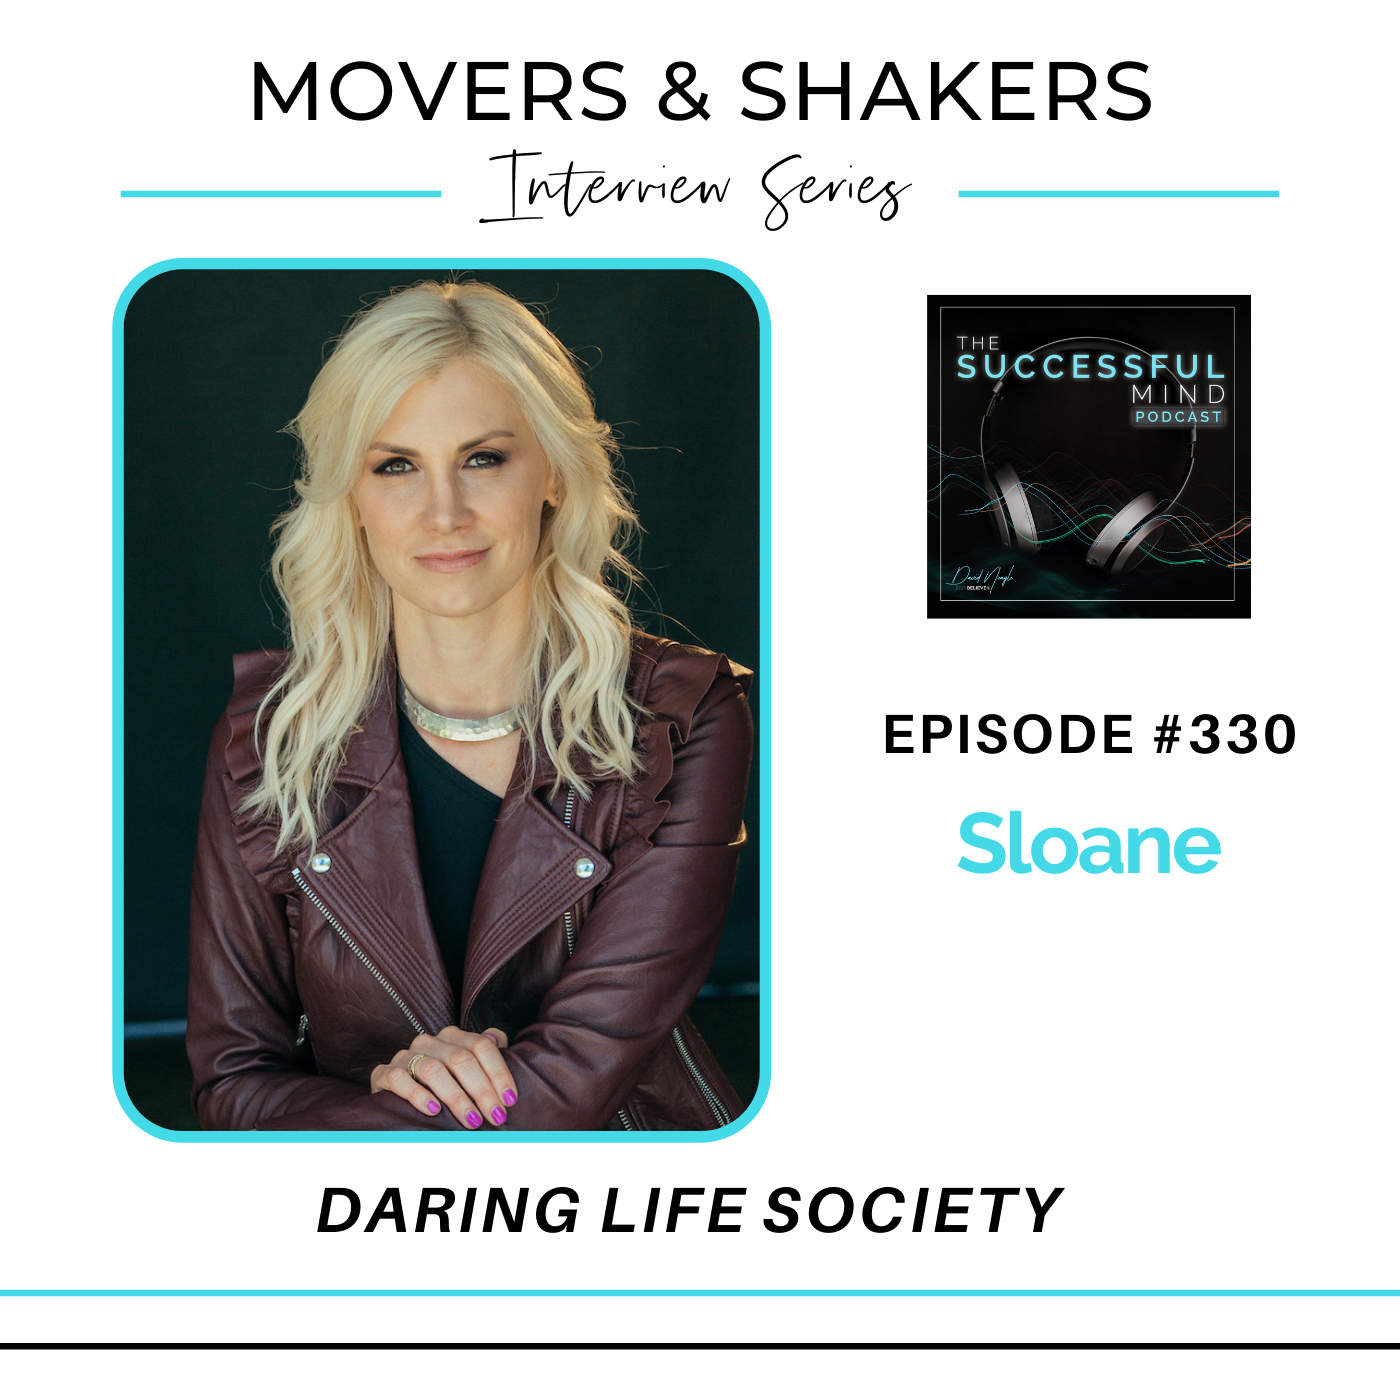 Movers & Shakers - Episode 330 - Sloane - The Daring Life Society